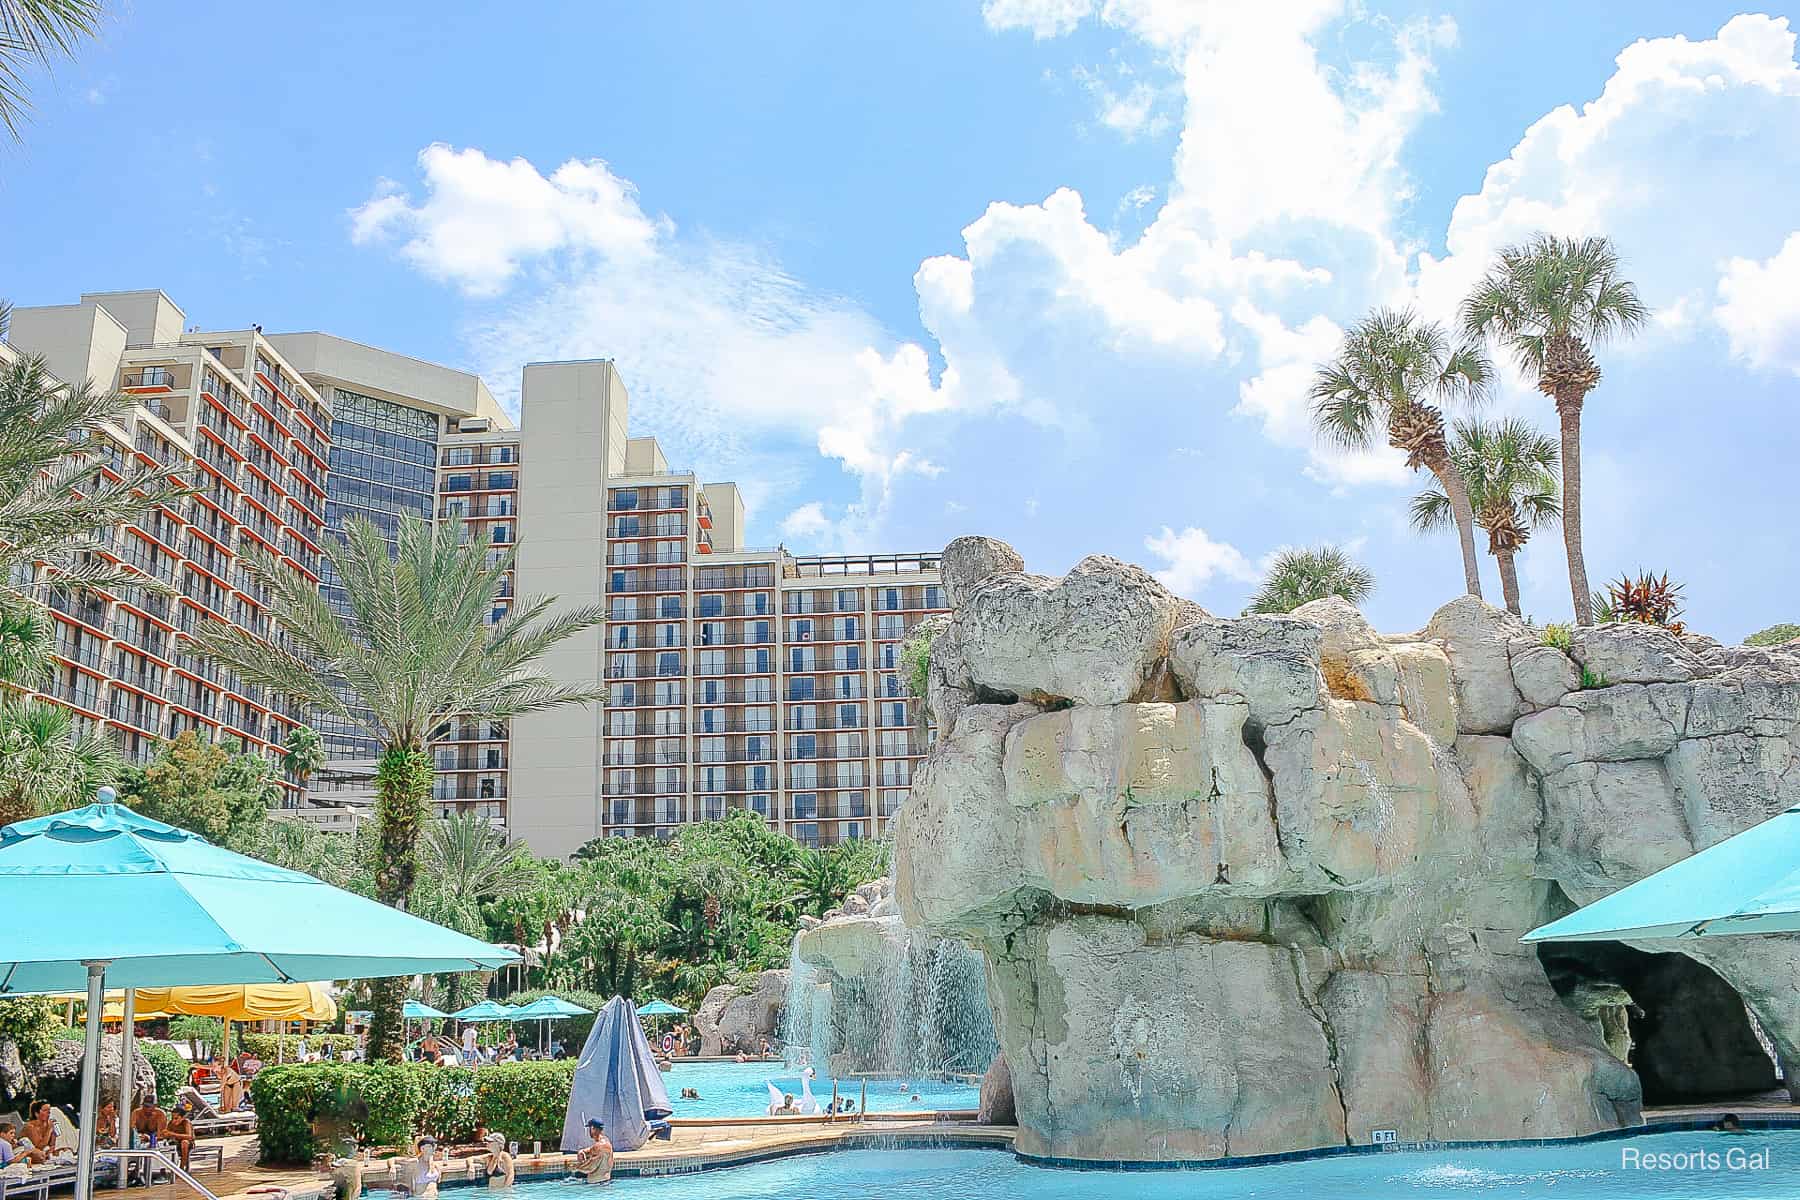 a view of the Hyatt Regency Grand Cypress Hotel from the pool. 